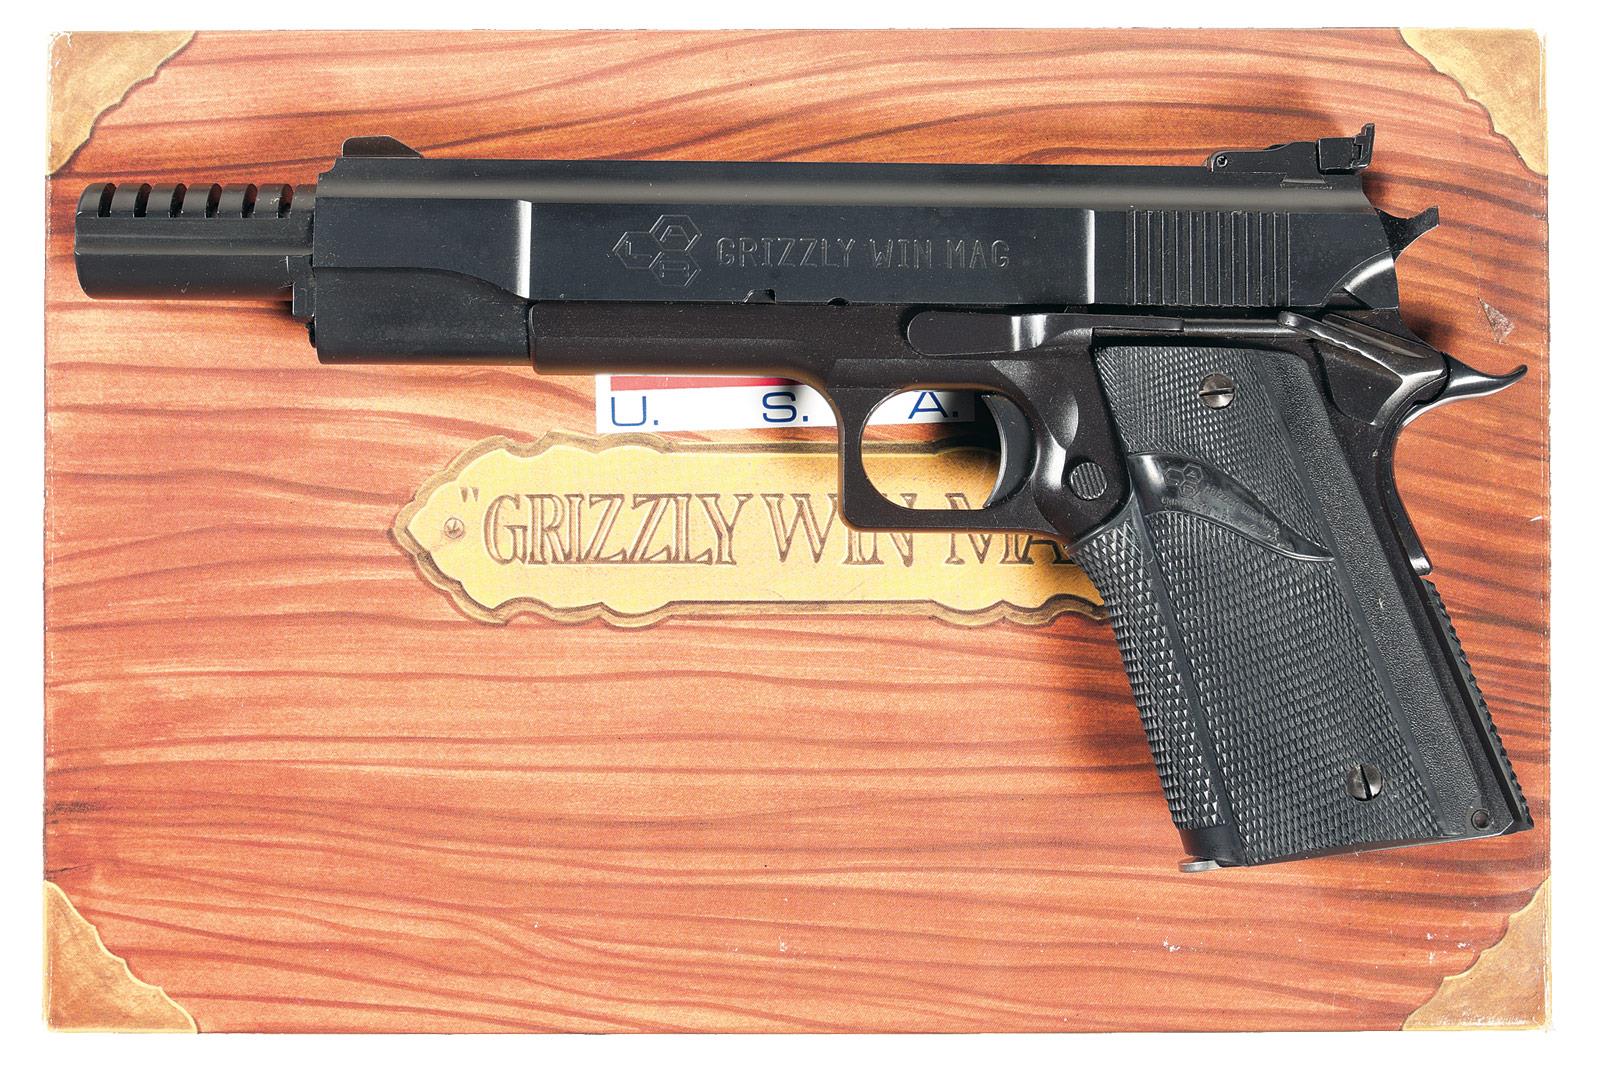 Lar Mfg Co Grizzly Win Mag Pistol 45 Win magnum | Rock Island Auction